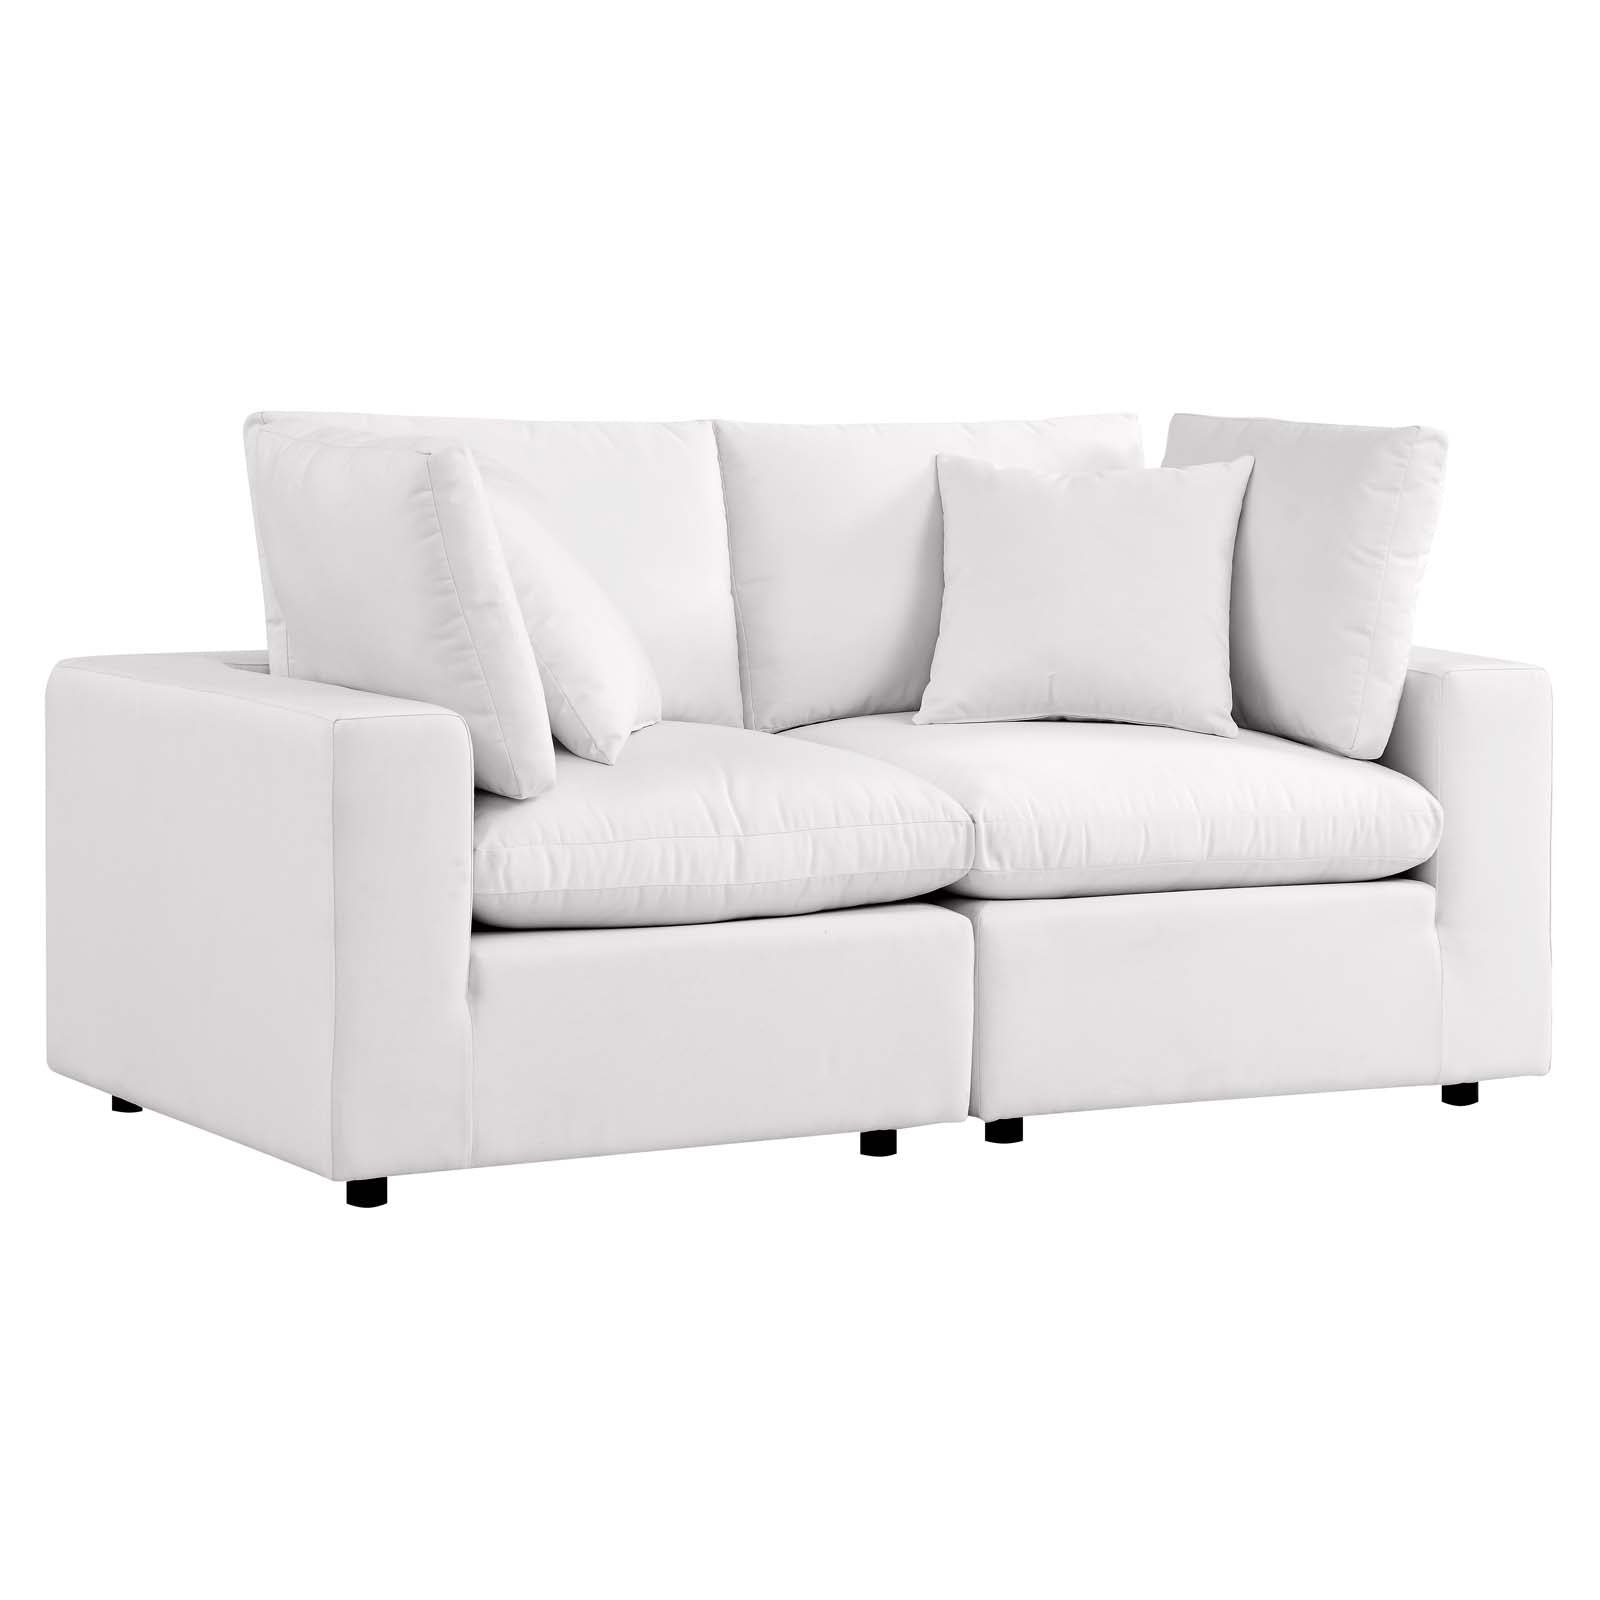 Modway Outdoor Sofas - Commix Overstuffed Outdoor Patio Loveseat White